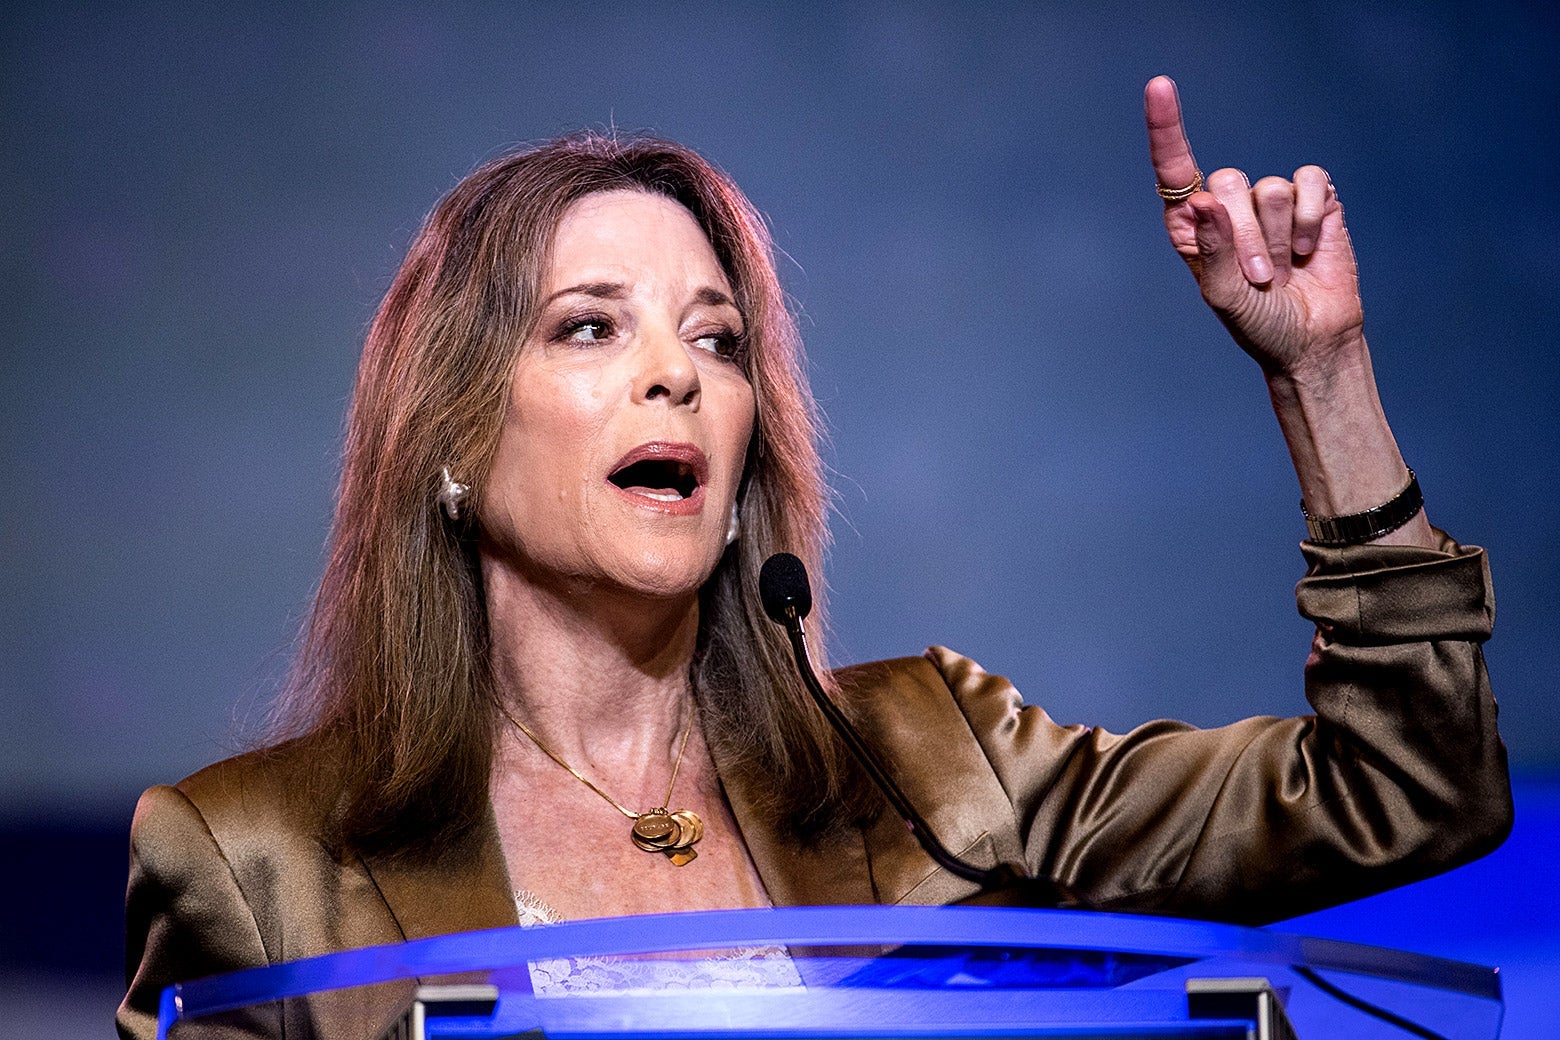 Marianne Williamson gestures while speaking from a podium.